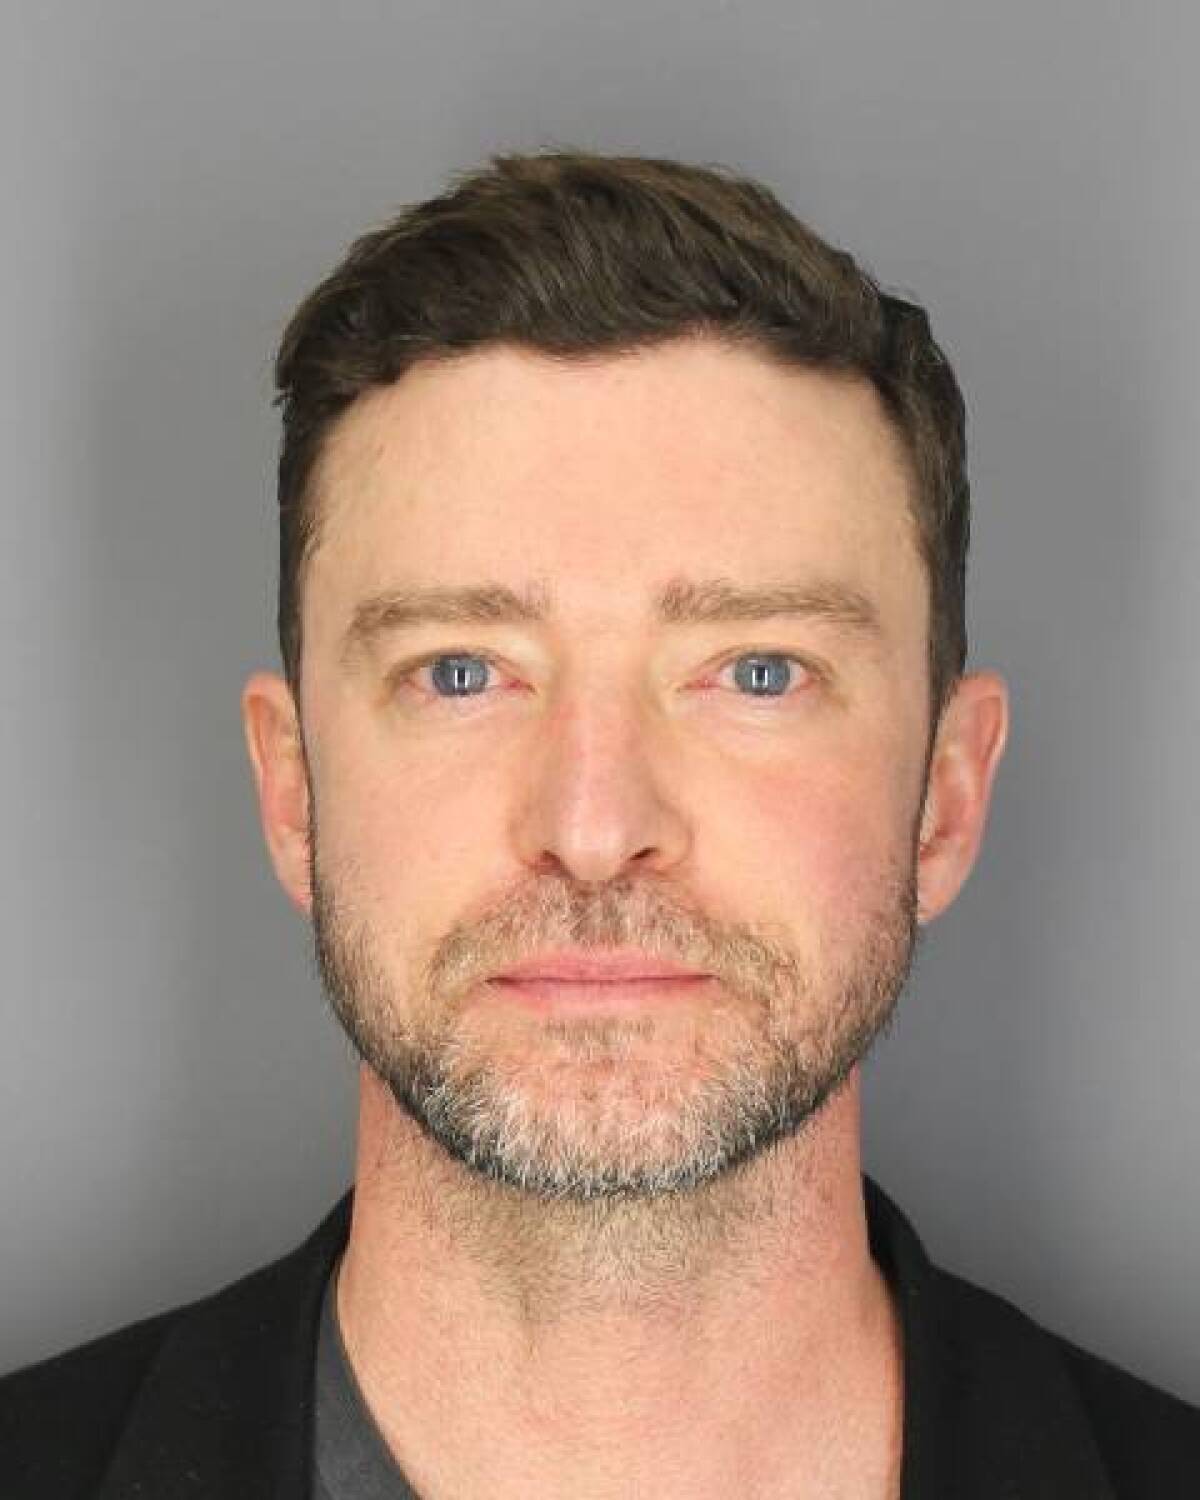 A police mug shot of Justin Timberlake against a light gray background